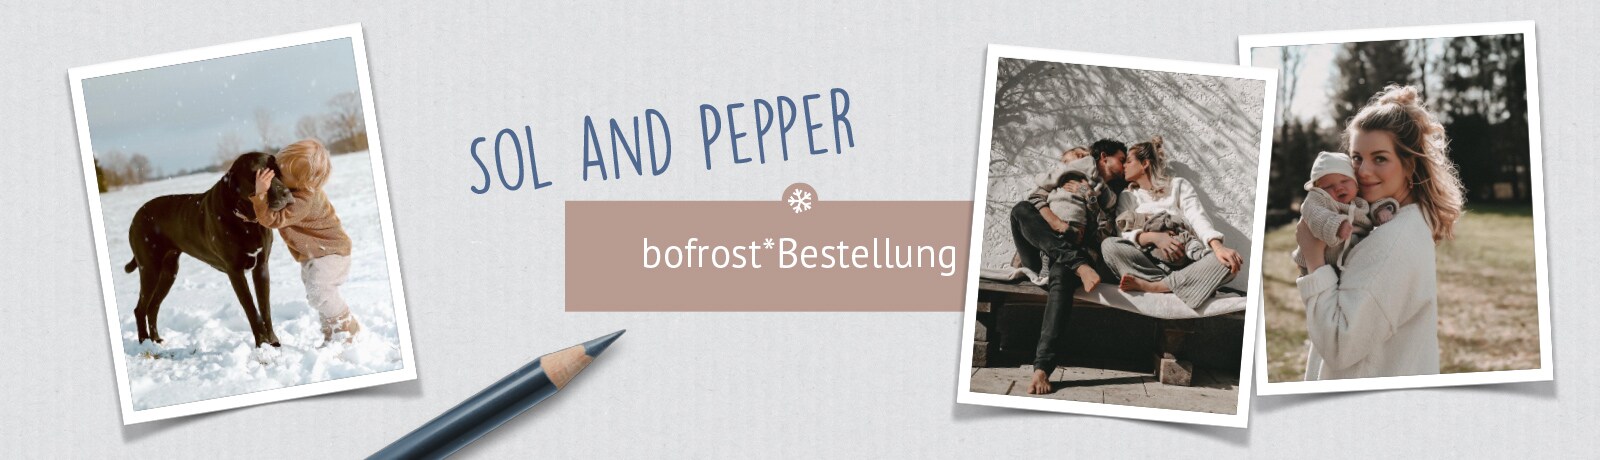 Sol and Pepper bei bofrost*